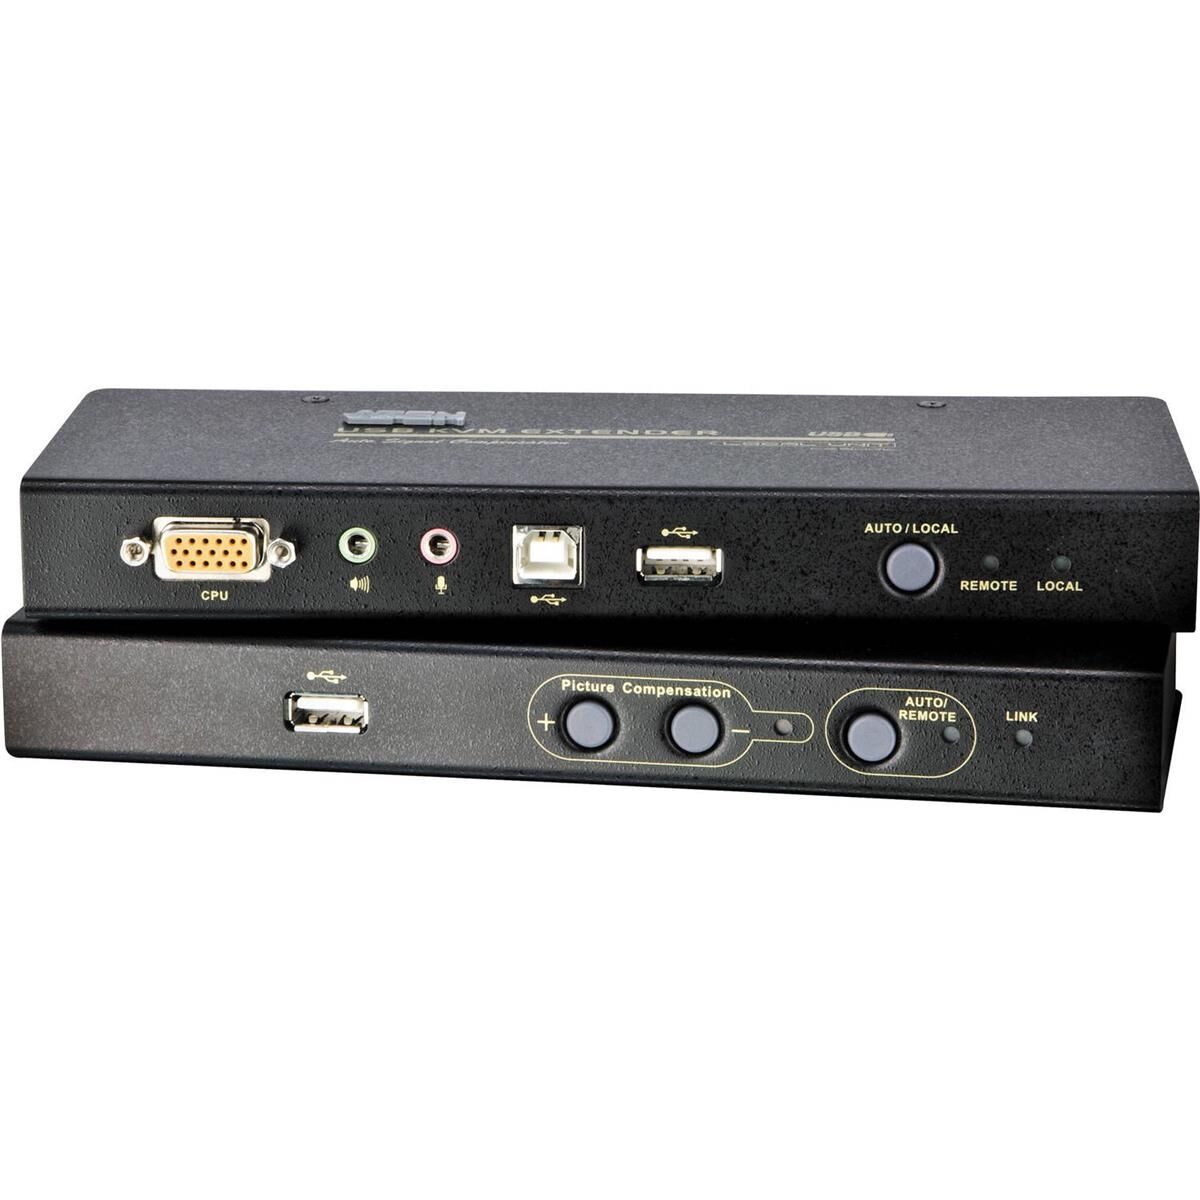 Aten CE800B Cat5e USB KVM Console Extender, Connects Up to 850' Distance